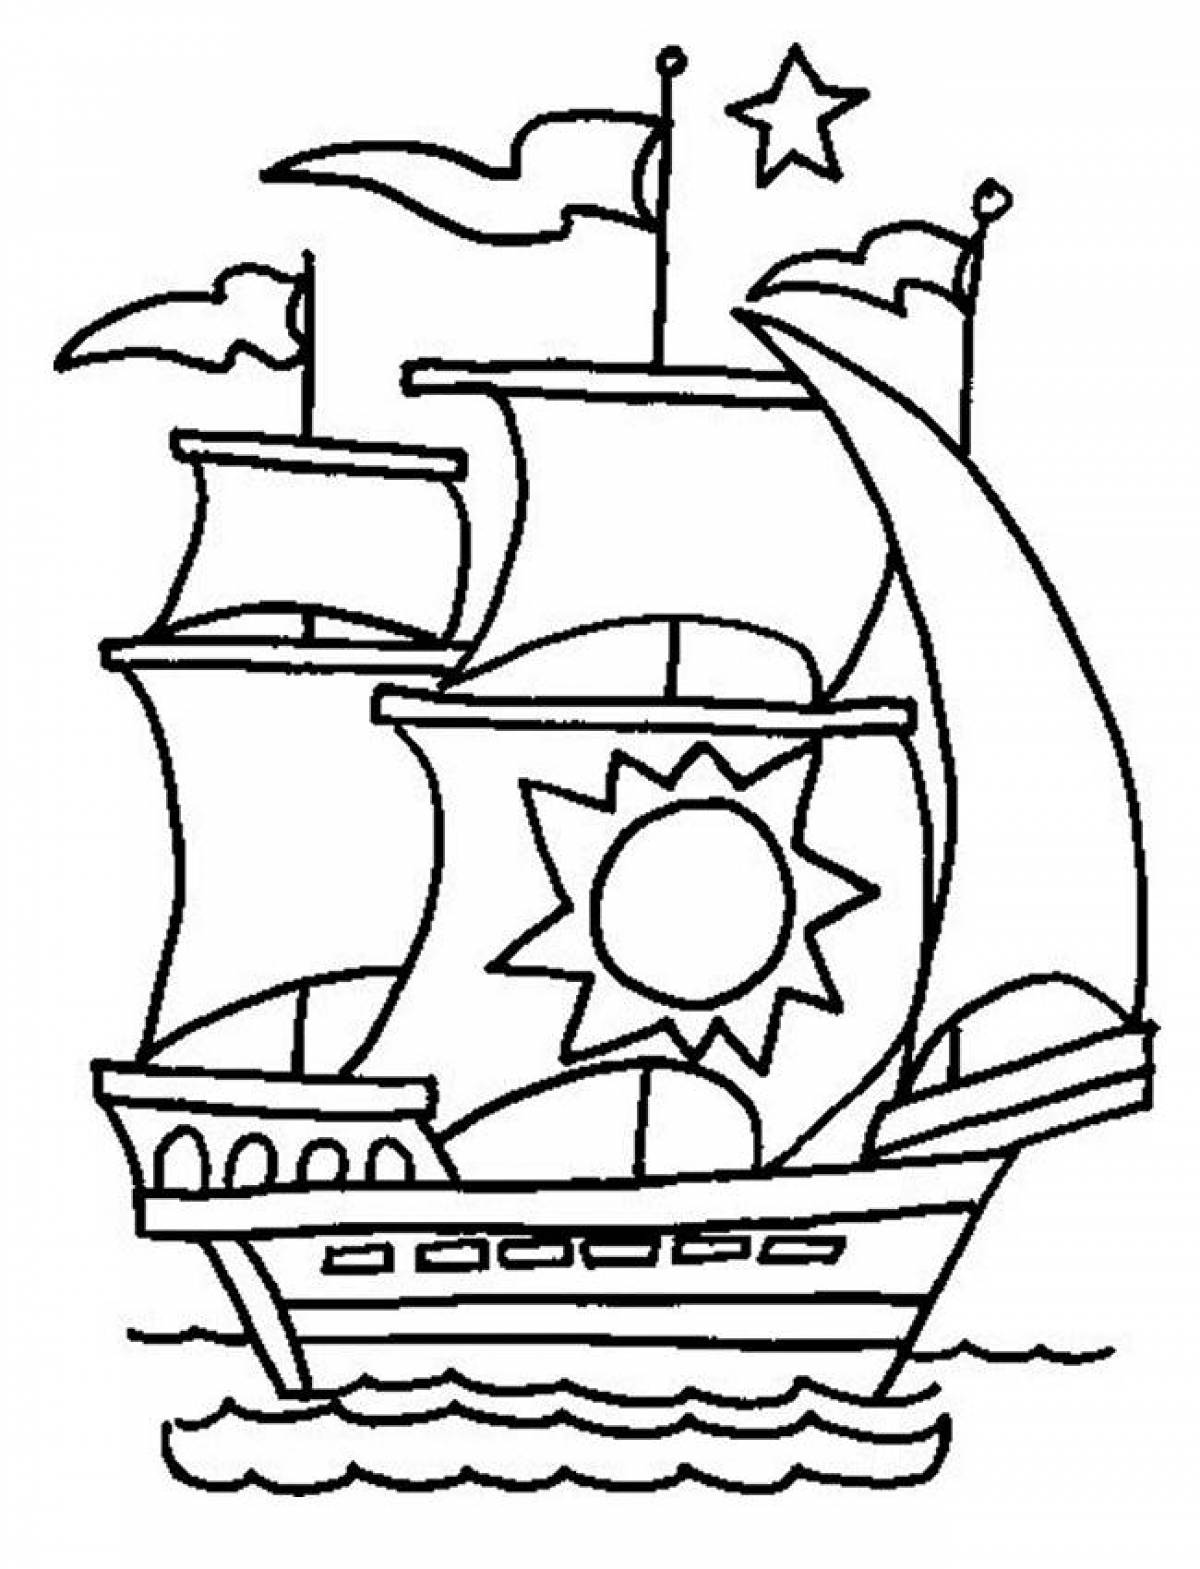 Crazy ship coloring pages for kids